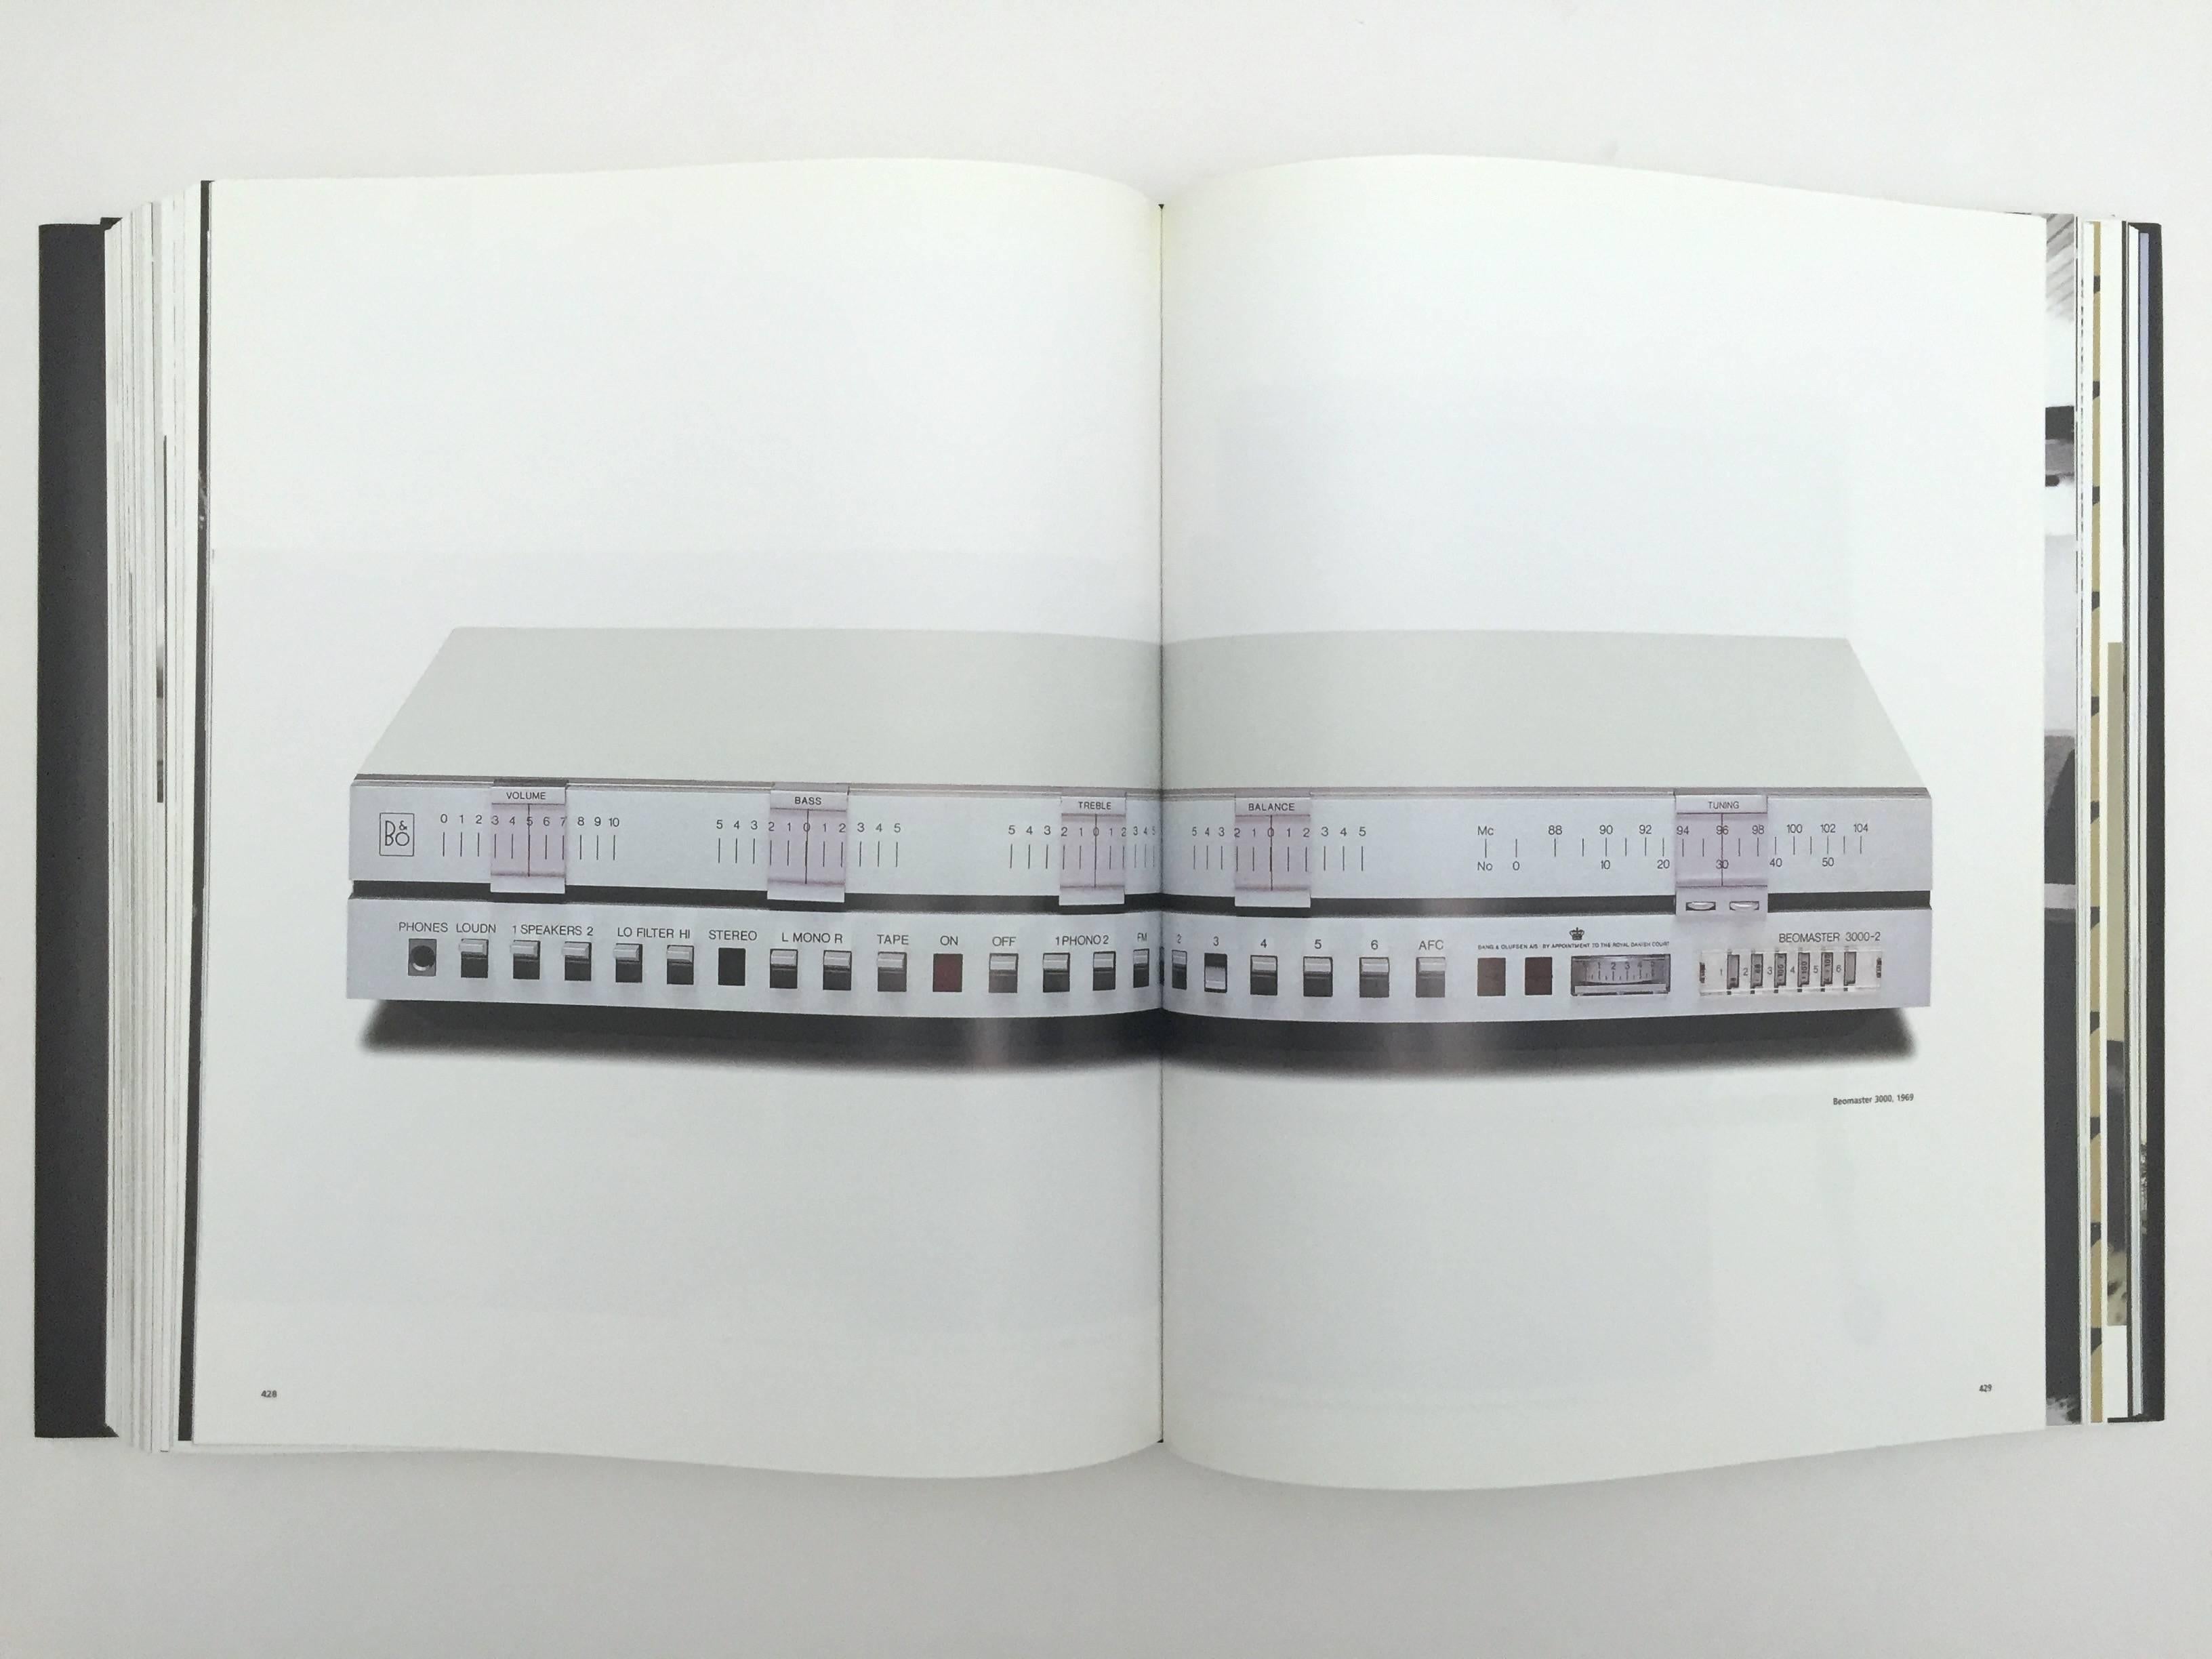 Published by Vidsyn 3 edition, 2003

A large, heavily illustrated biography of the Bang & Olufsen company and it's many struggles and advances through the years. From troublesome beginnings in a wartime environment, to the success of the